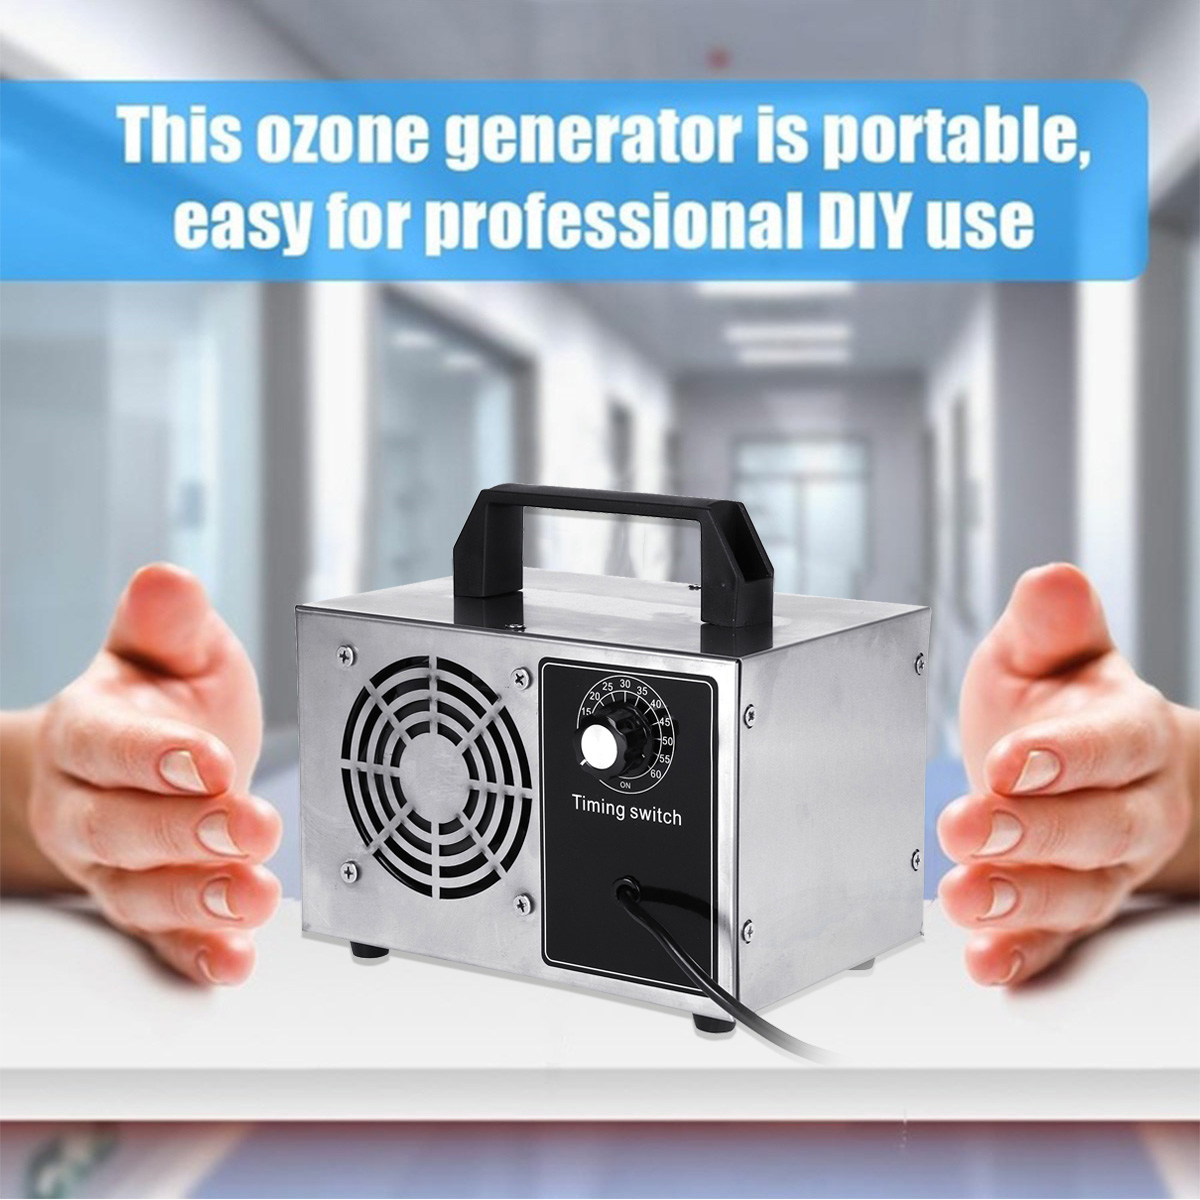 220V-Ozone-Generator-Commercial-Long-Life-Timing-Purifier-Air-Cleaner-Deodorizer-1710921-1